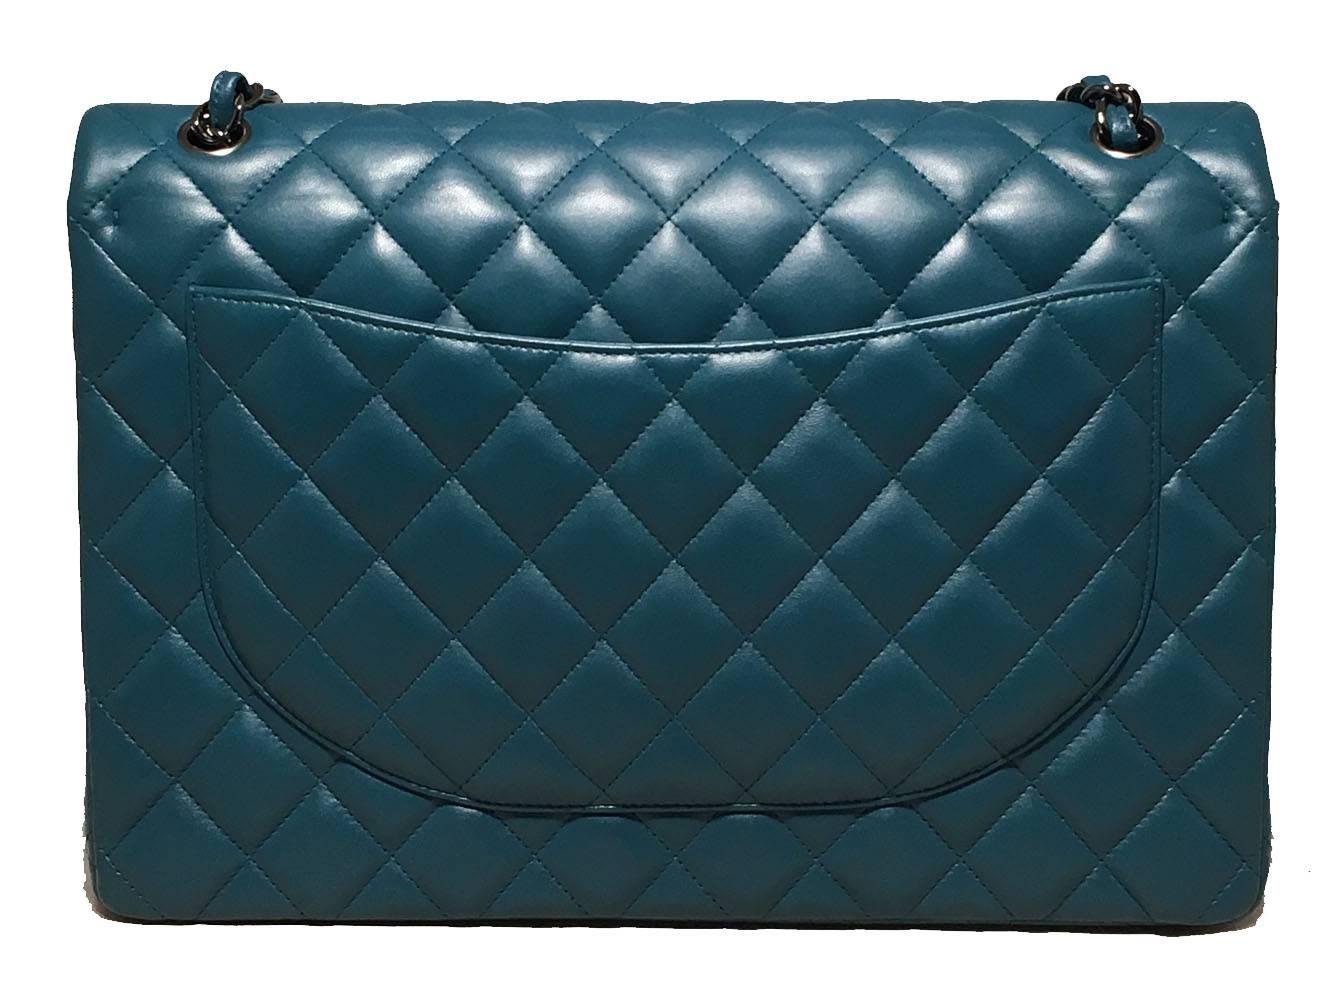 Blue Chanel Dark Teal Quilted Leather 2.55 Maxi Double Flap Classic Shoulder Bag